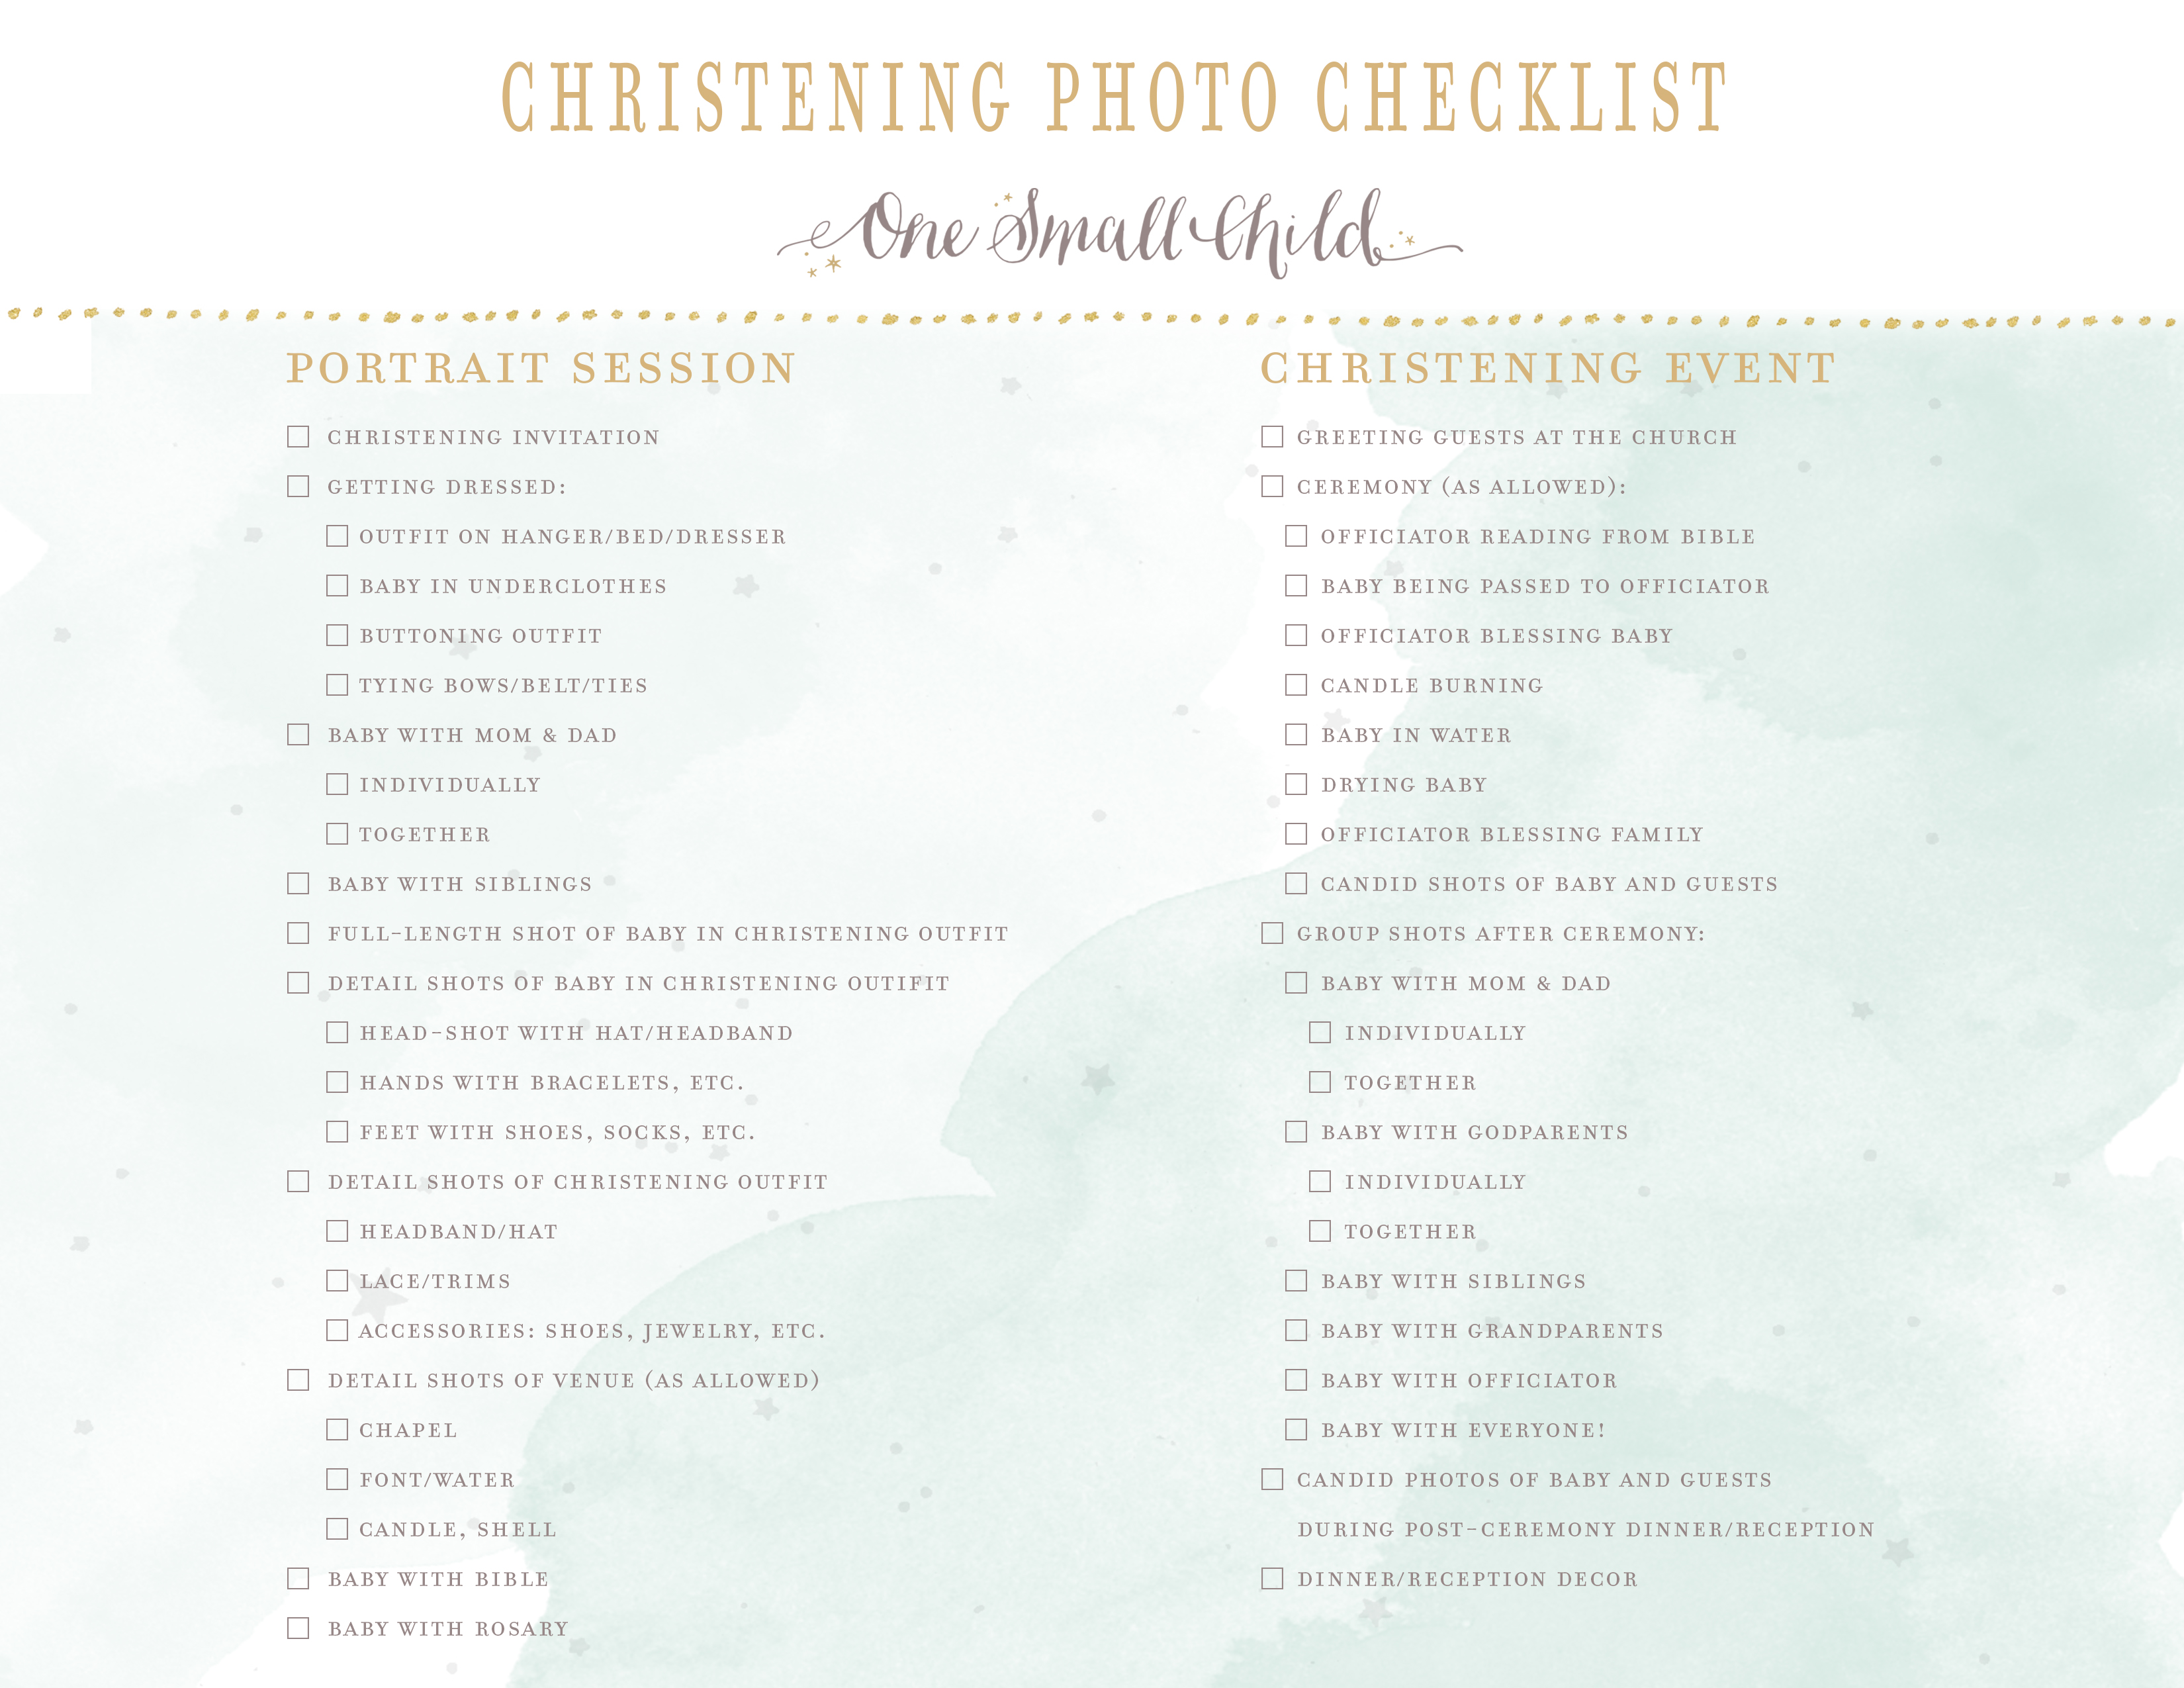 Christening Photography Check List - One Small Child